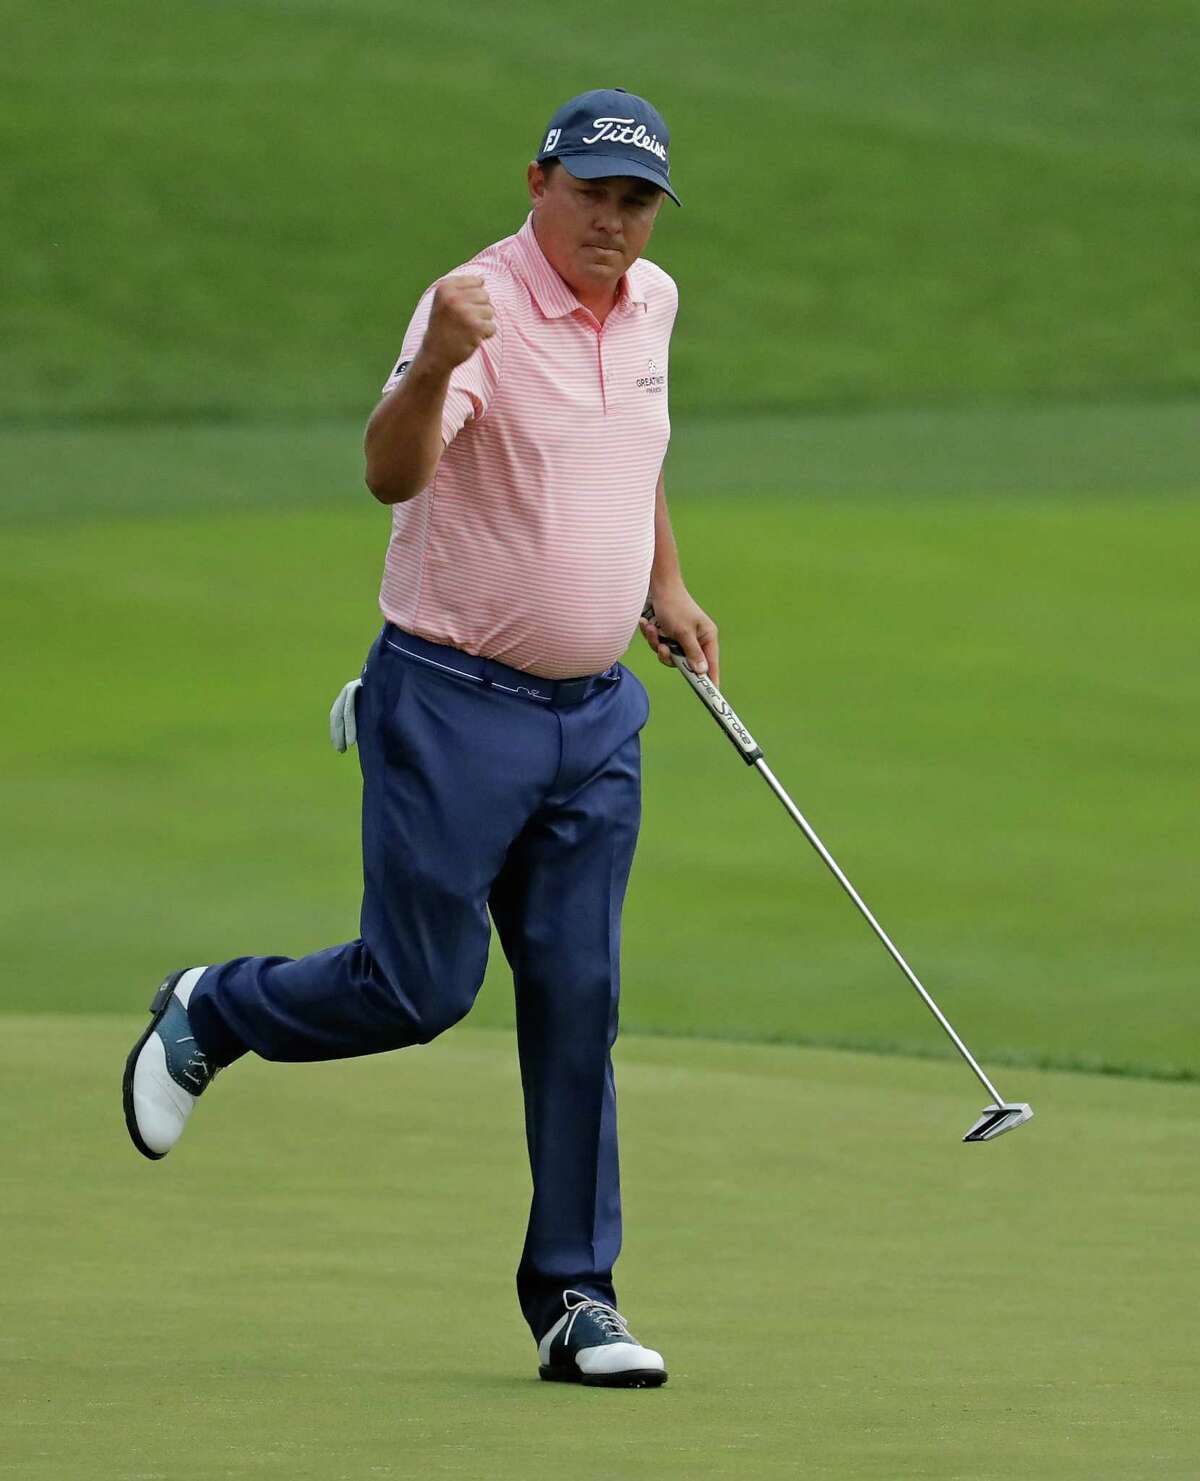 Jason Dufner puts the finishing touches on a par putt on the 18th hole to finish with a ﻿68 and win the Memorial﻿.